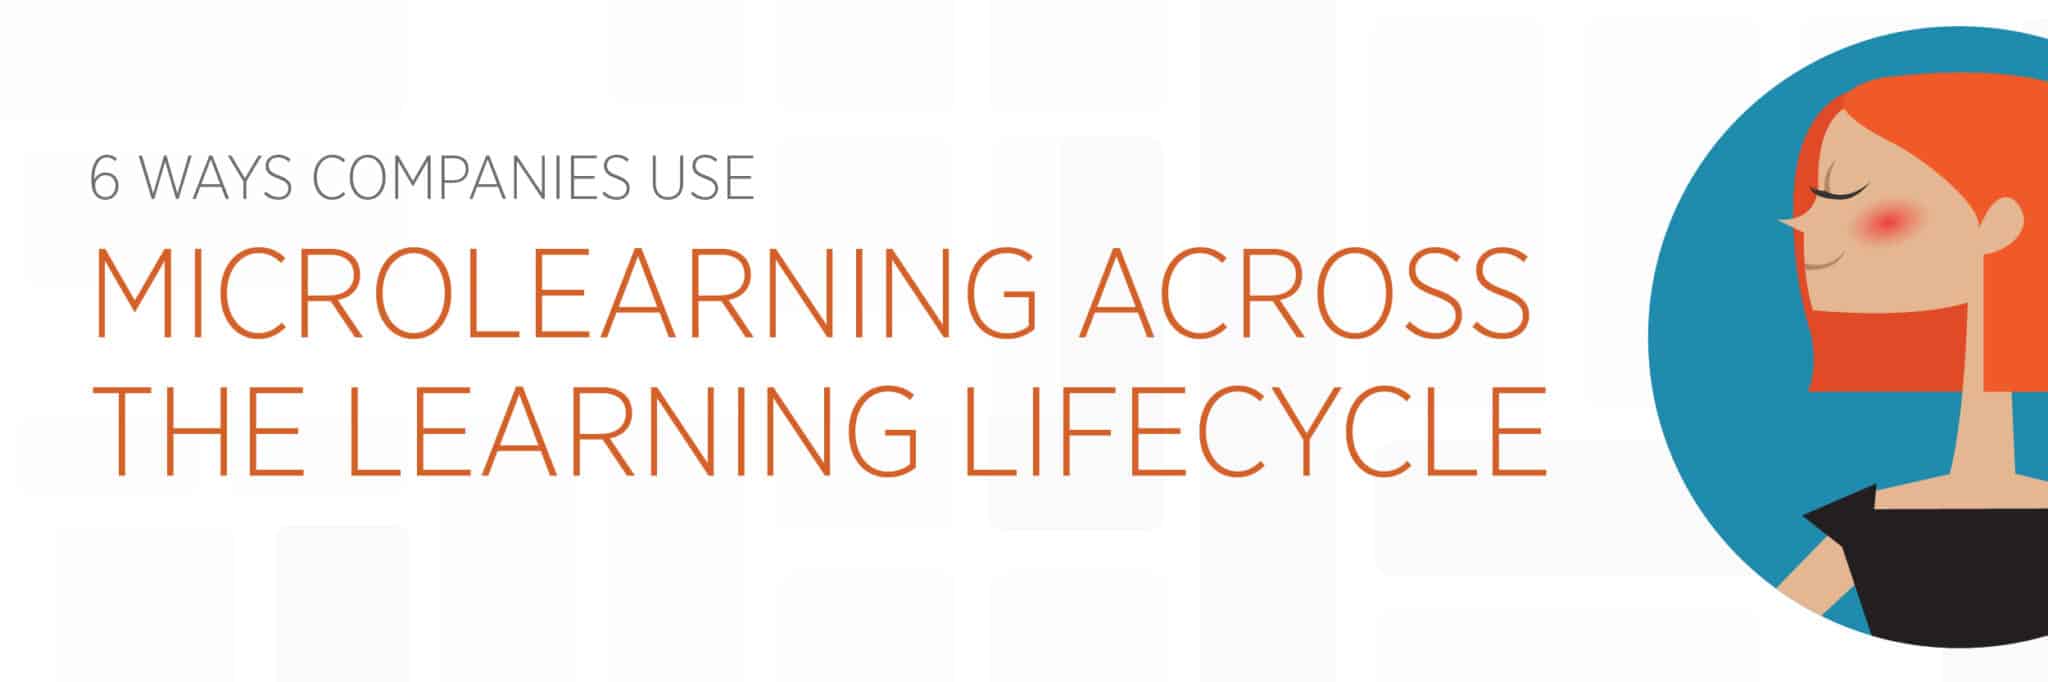 Ways companies use microlearning in the learning lifecycle